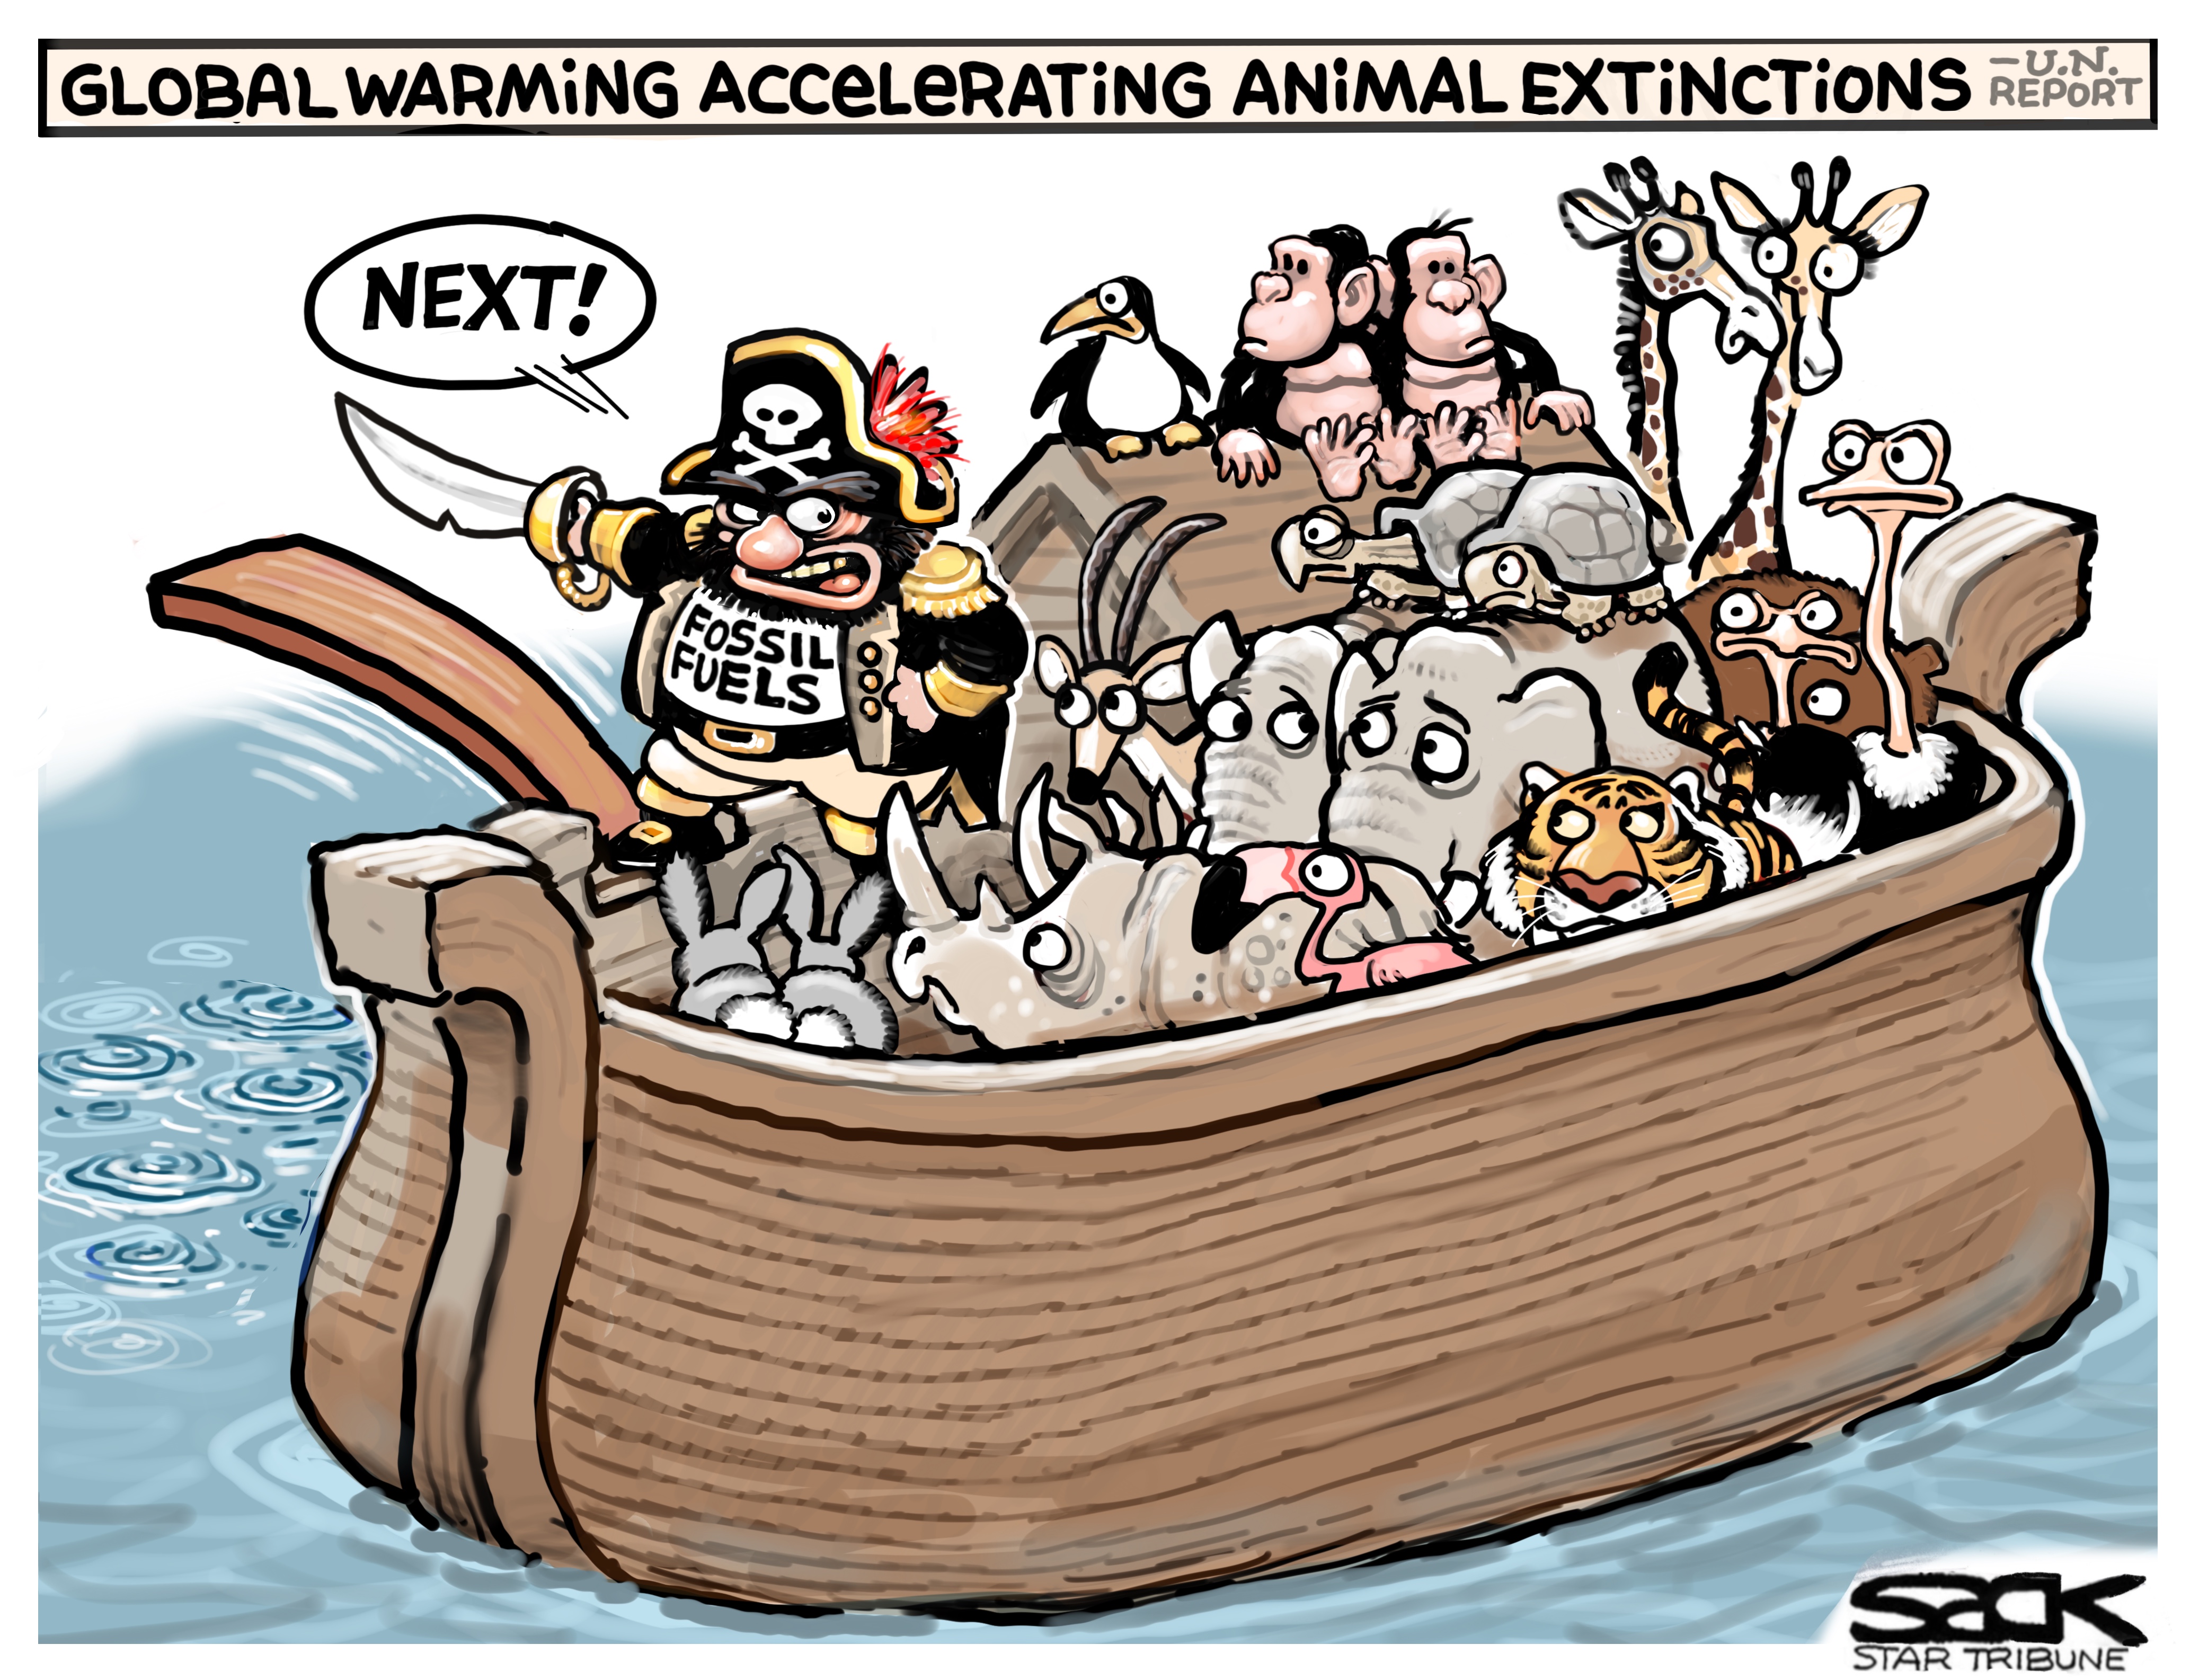 5 devastatingly funny cartoons about the UN's extinction report | The Week